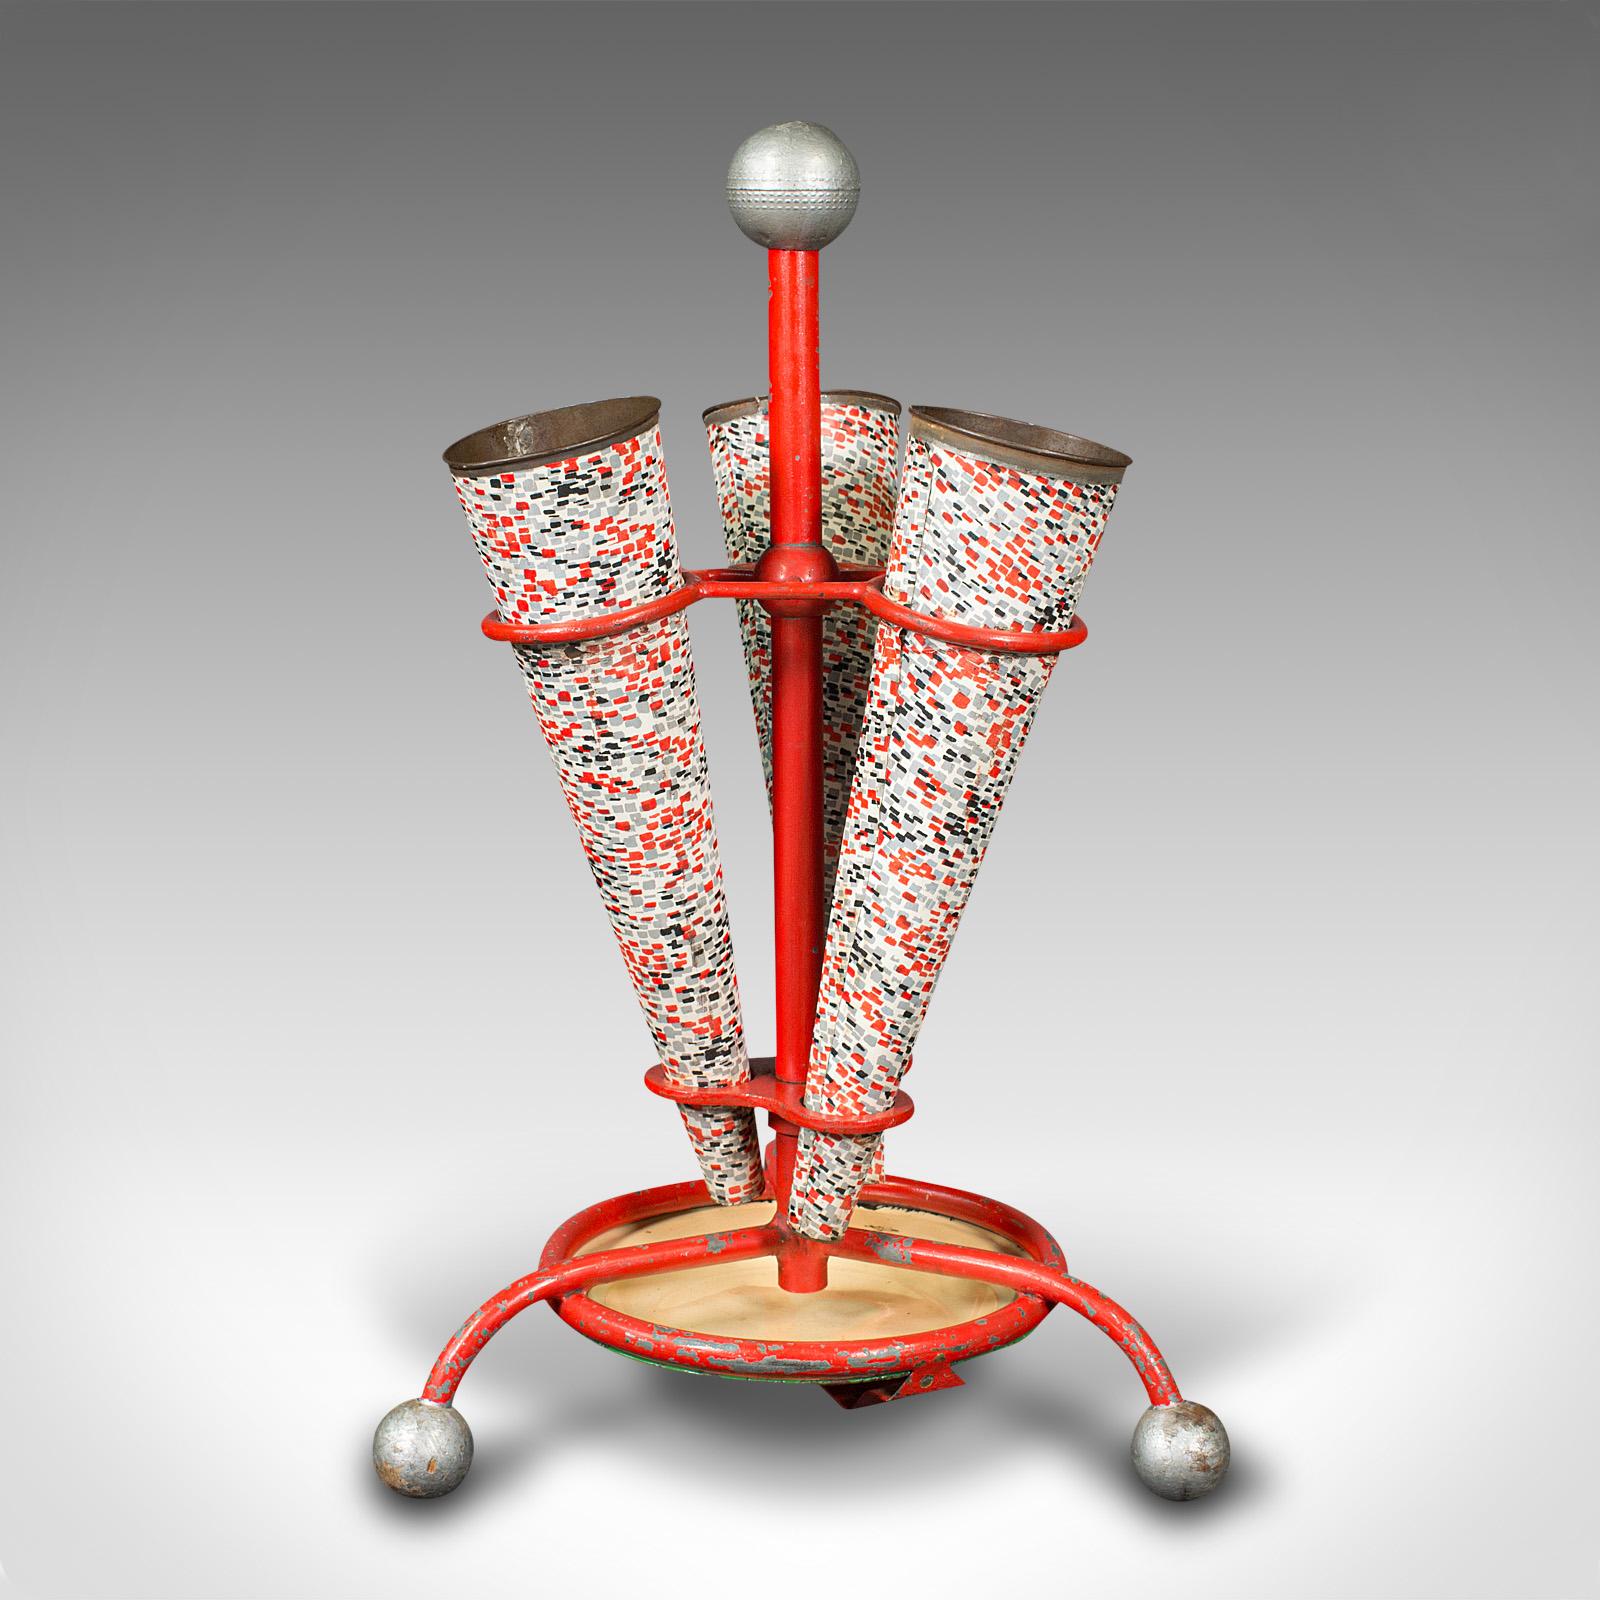 This is a vintage decorative umbrella stand. A Continental, enamelled steel hall rack or dried flower vase, dating to the mid 20th century, circa 1960.

Splendid mid-century forms and colour present a cheerful appeal
Displays a desirable aged